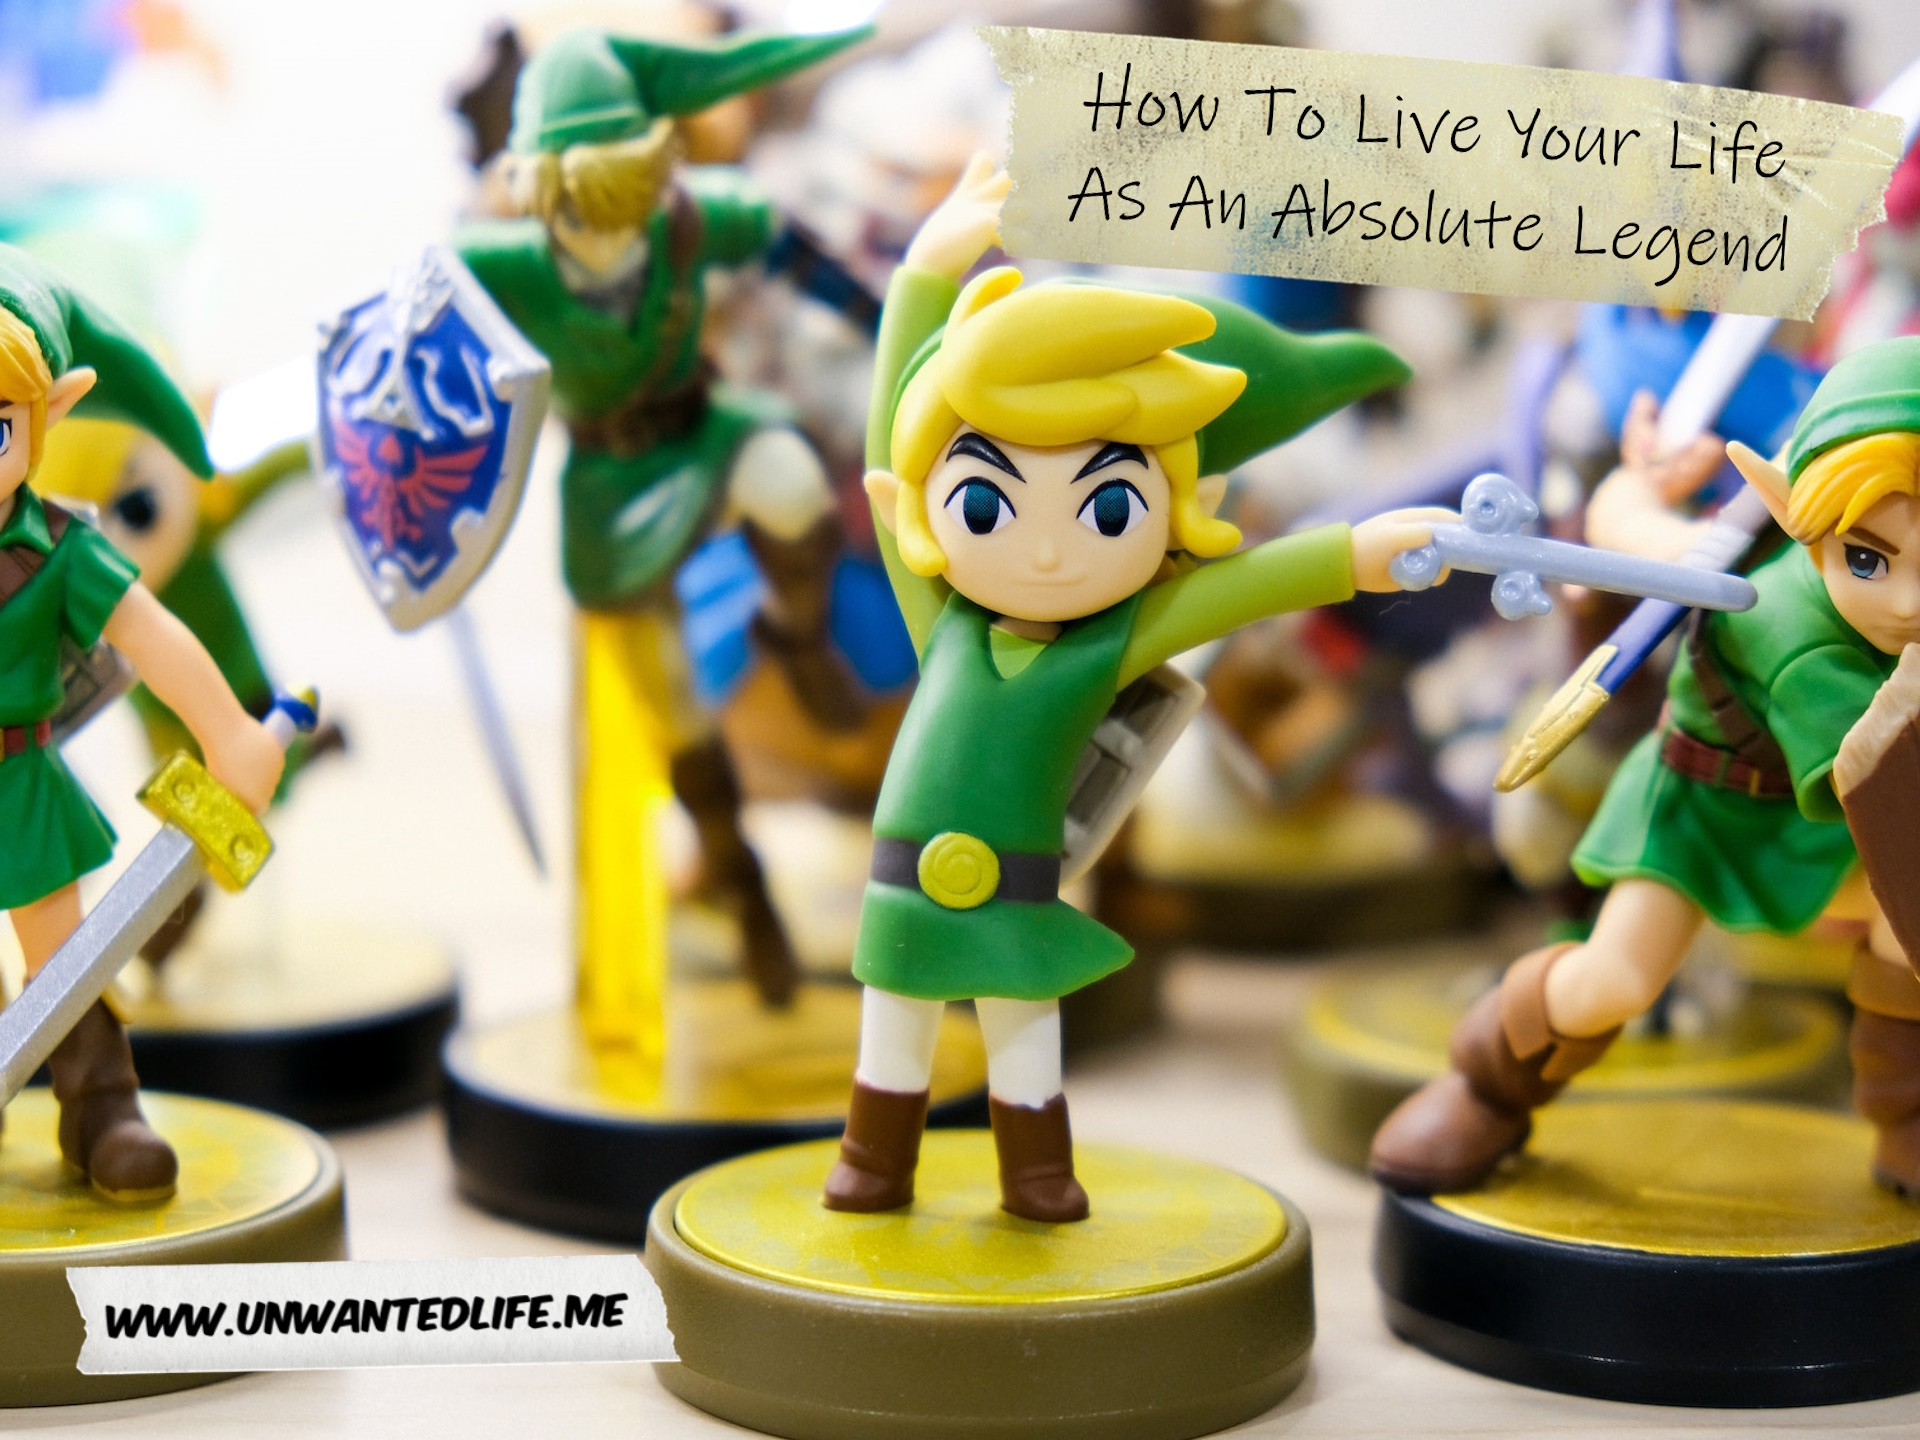 A photo of different mini statues of Link from The Legend of Zelda to represent the topic of the article - How To Live Your Life As An Absolute Legend